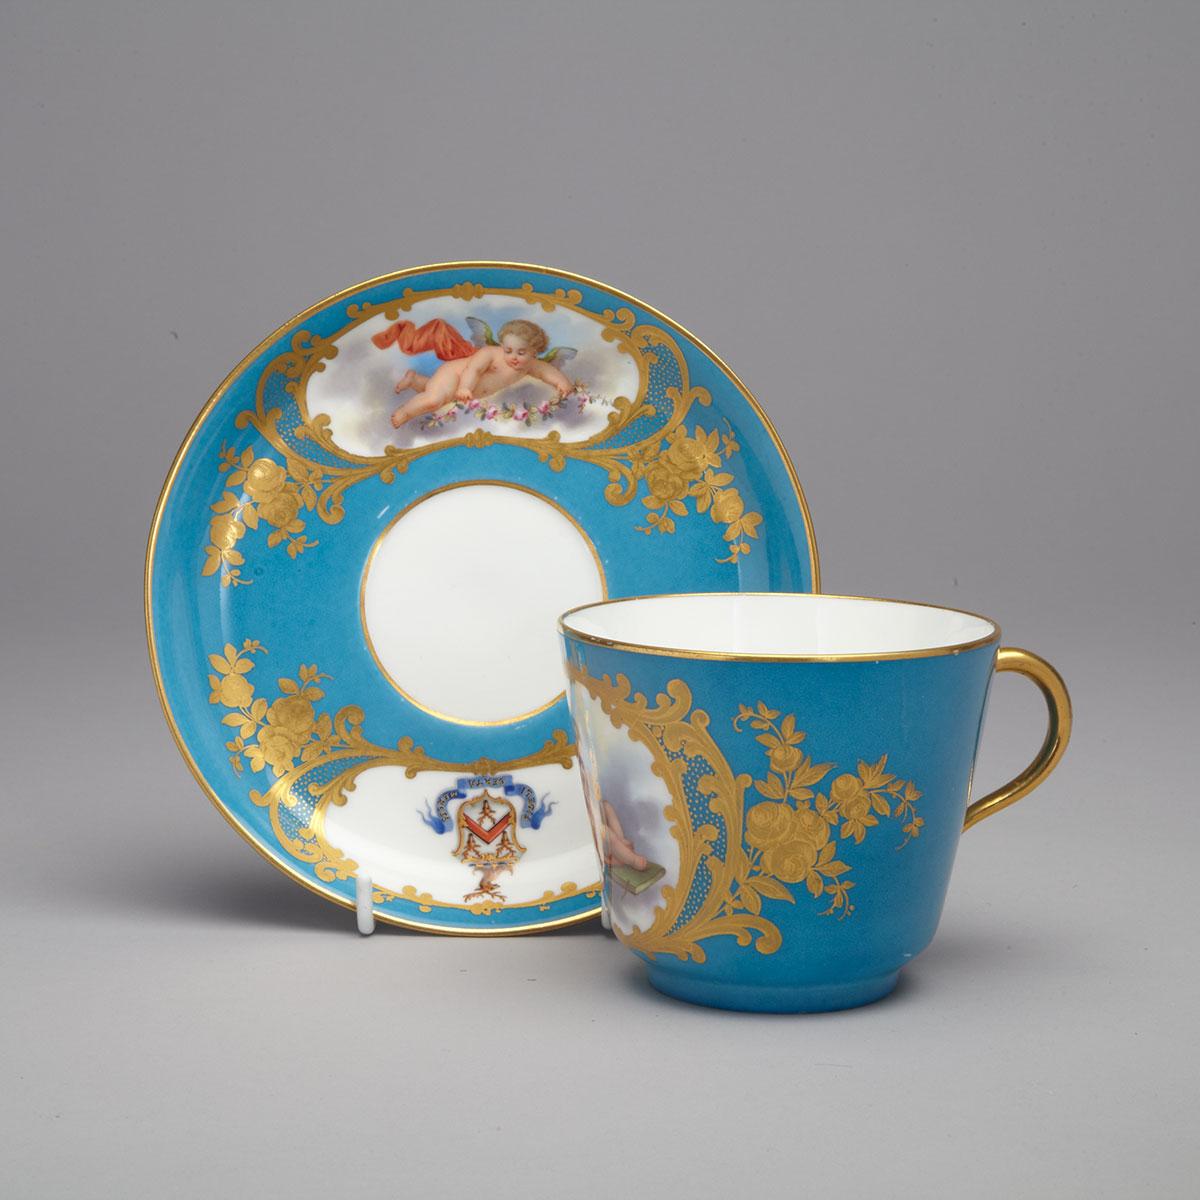 ‘Sèvres’ Bleu Celeste Ground Armorial Breakfast Cup and Saucer, 19th century